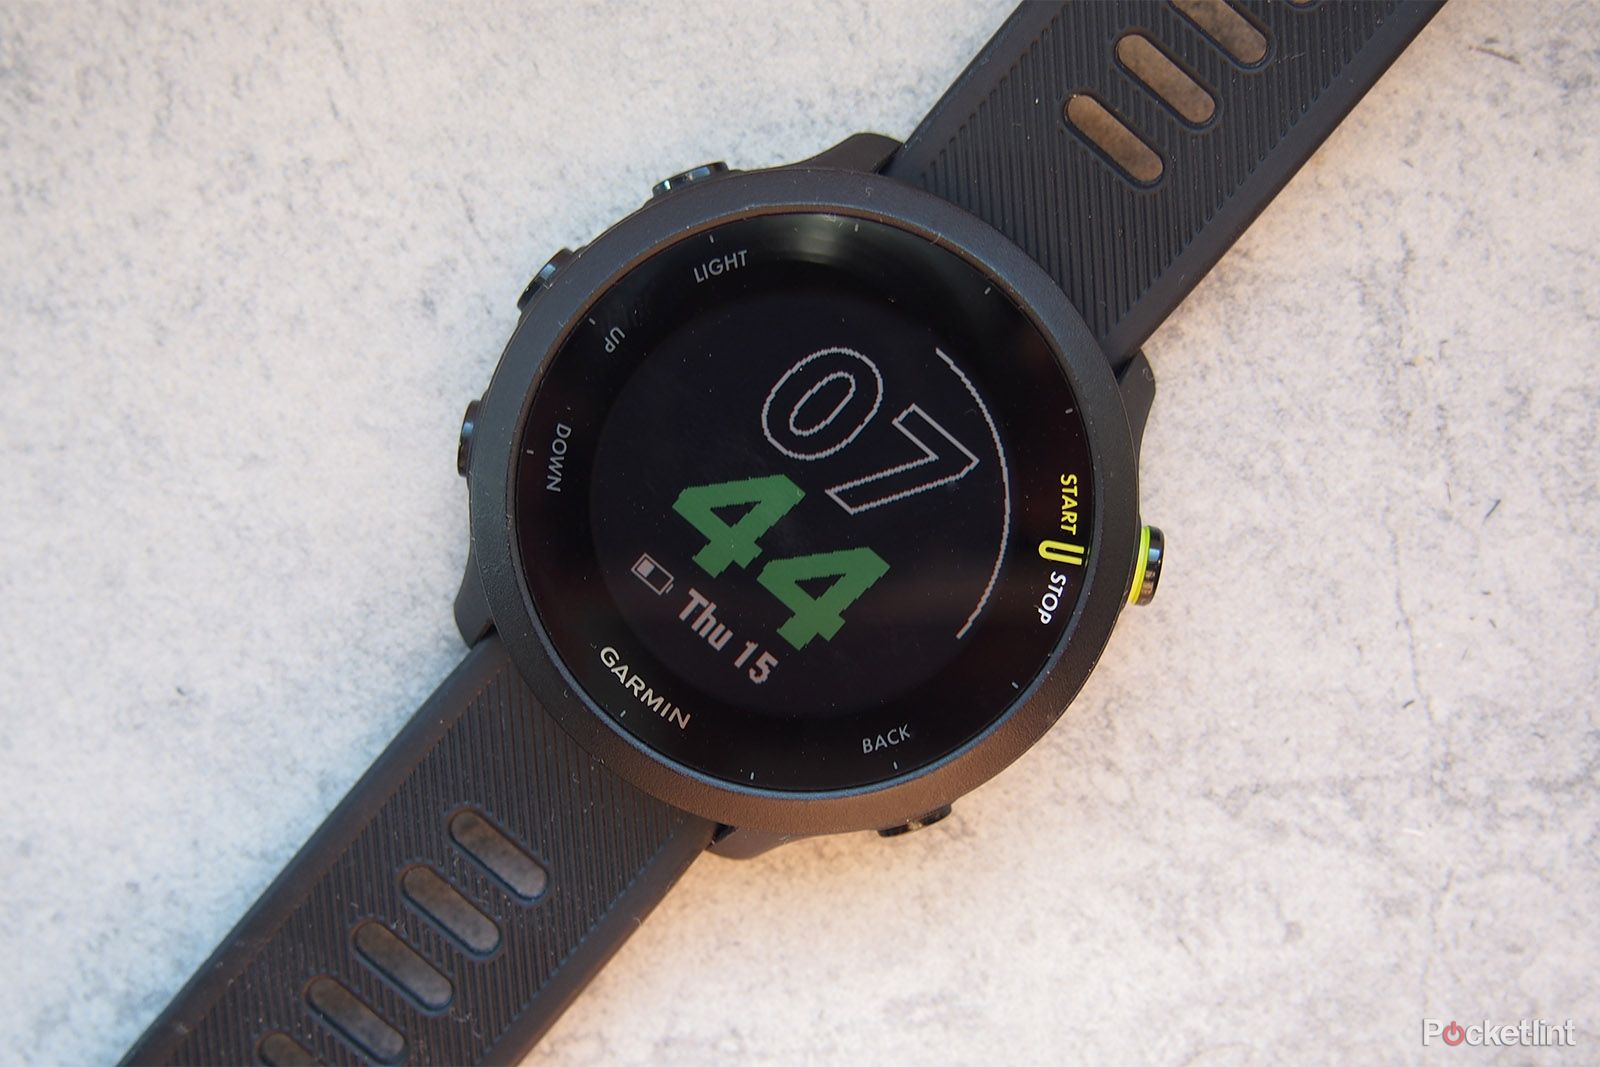 Garmin 45 Review: My Experience With Garmin's Entry Level Running Watch